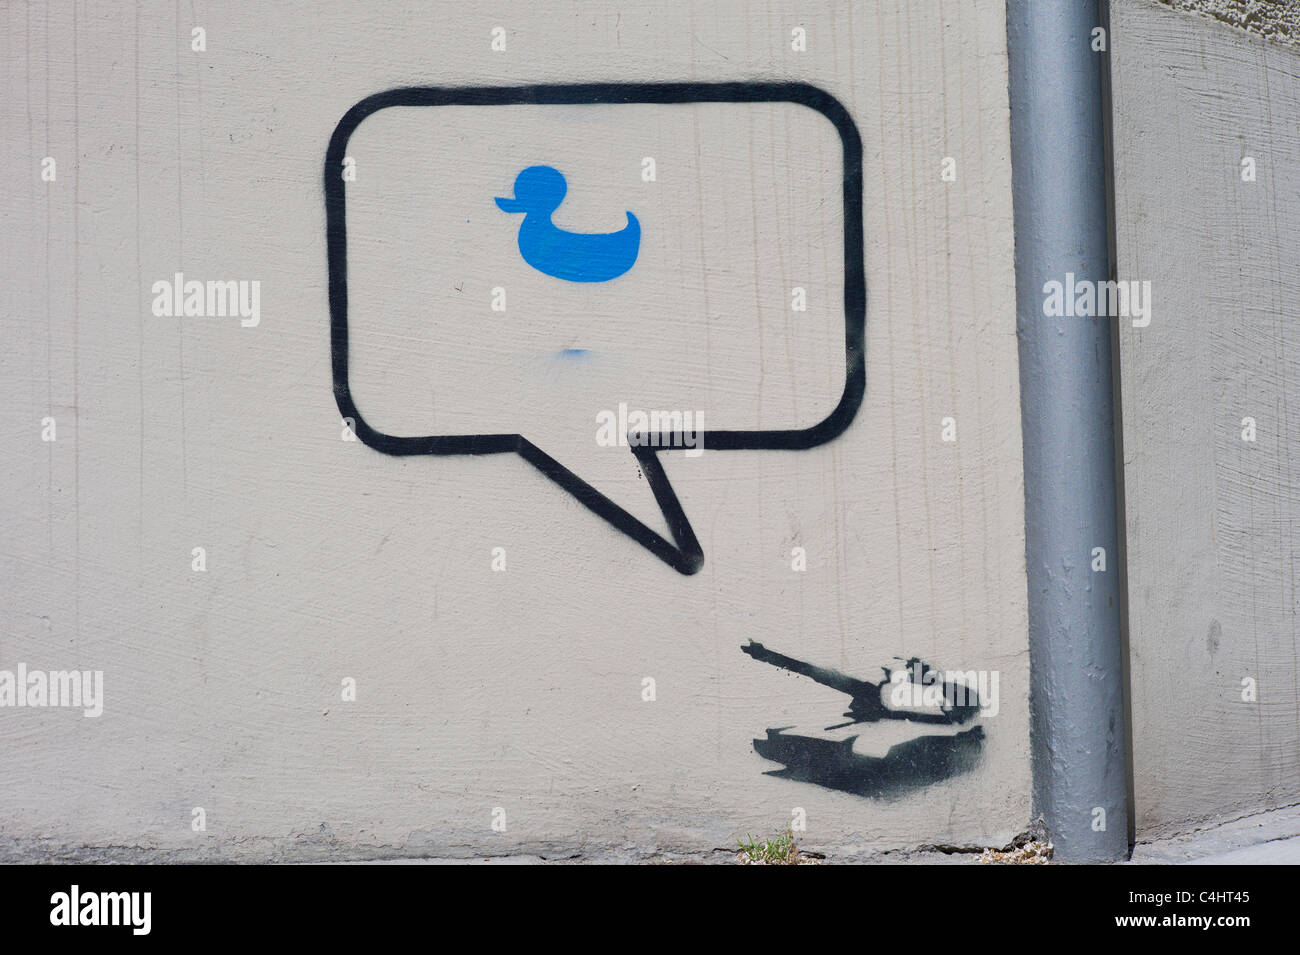 Stencil / graffito on a wall showing a  tank, a speech bubble next to the gun and a blue duck located inside the bubble Stock Photo